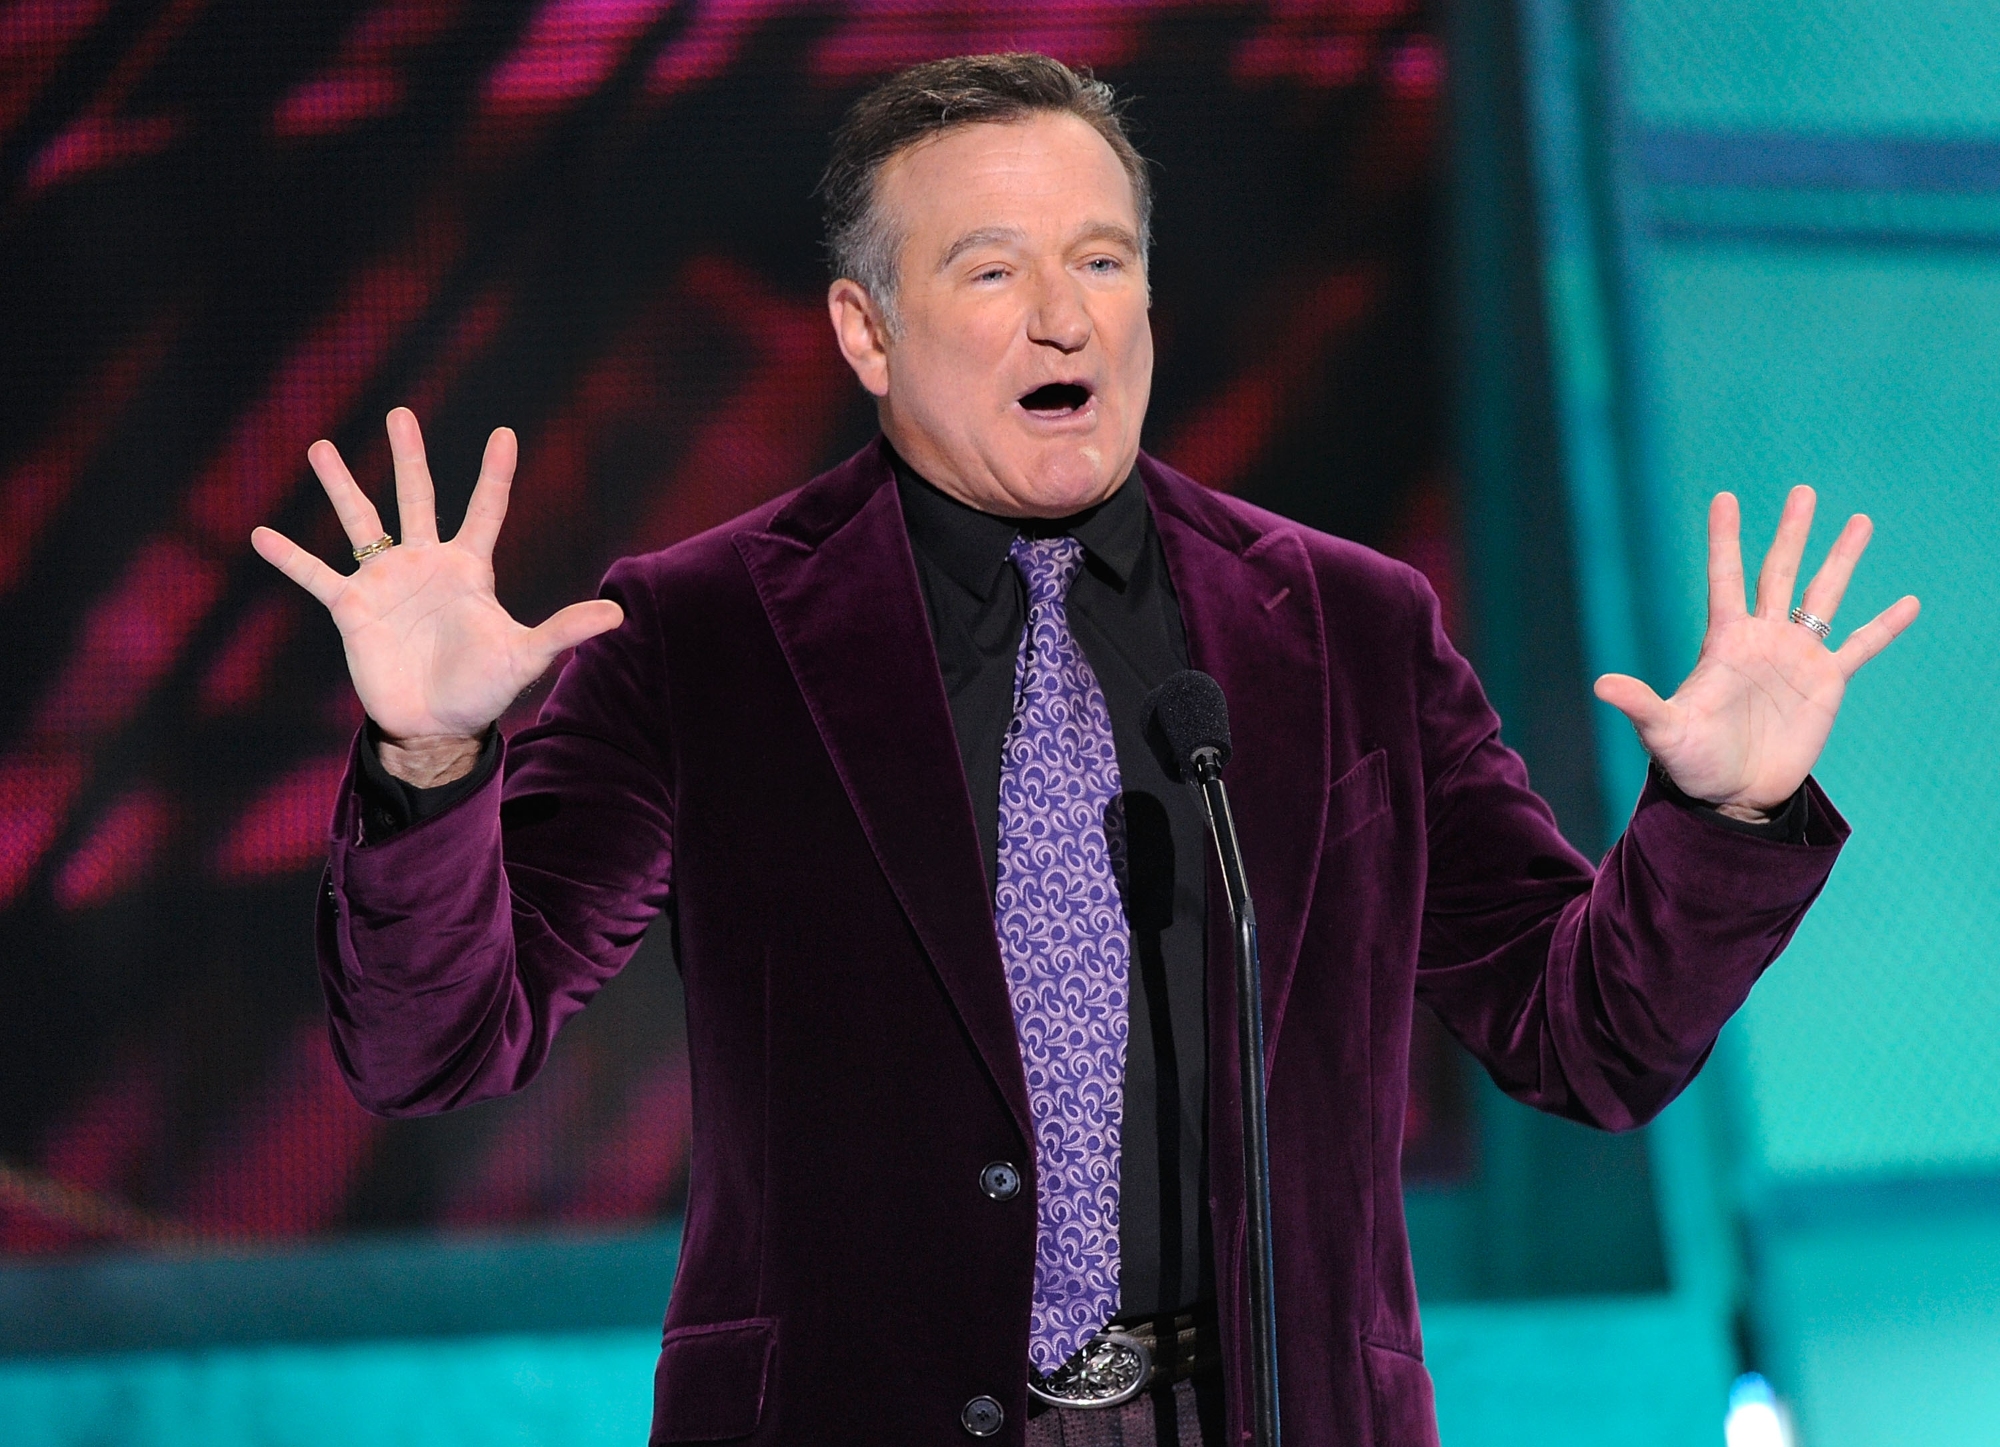 'Saturday Night Live' host Robin Williams. He's wearing a purple velvet suit jacket and a purple tie. He's holding his hands up with a look of surprise on his face.